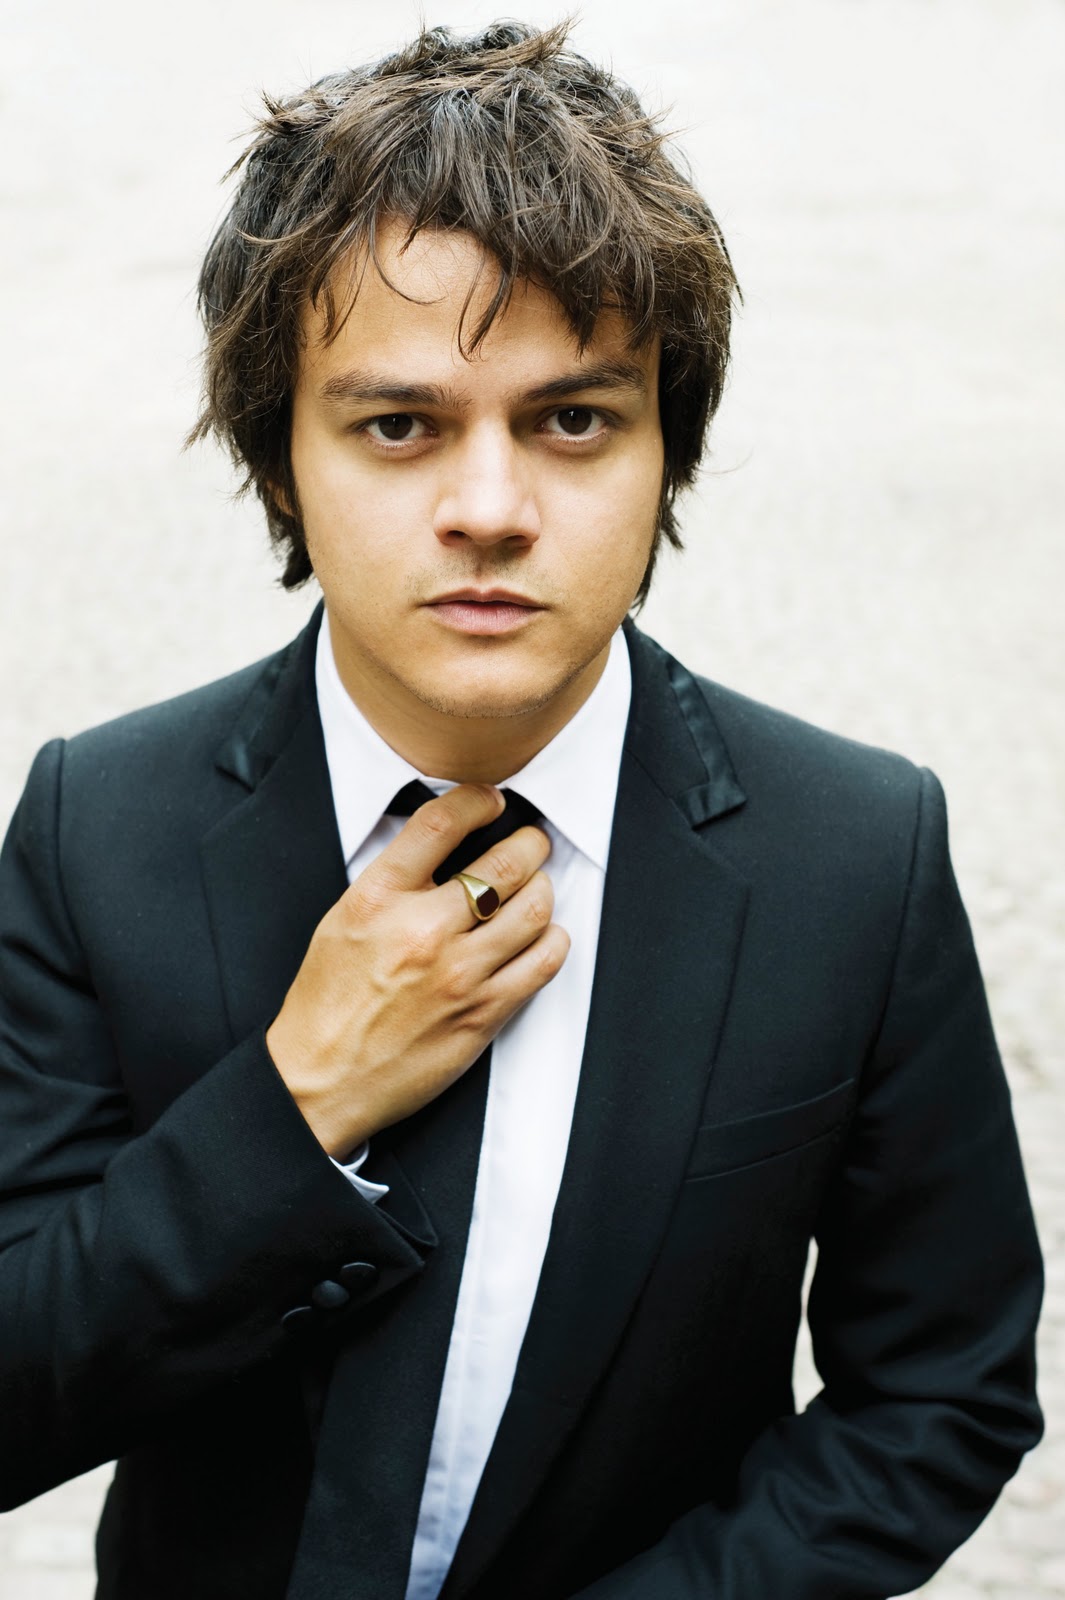 The 44-year old son of father John Cullum and mother Yvonne Jamie Cullum in 2024 photo. Jamie Cullum earned a  million dollar salary - leaving the net worth at 12 million in 2024